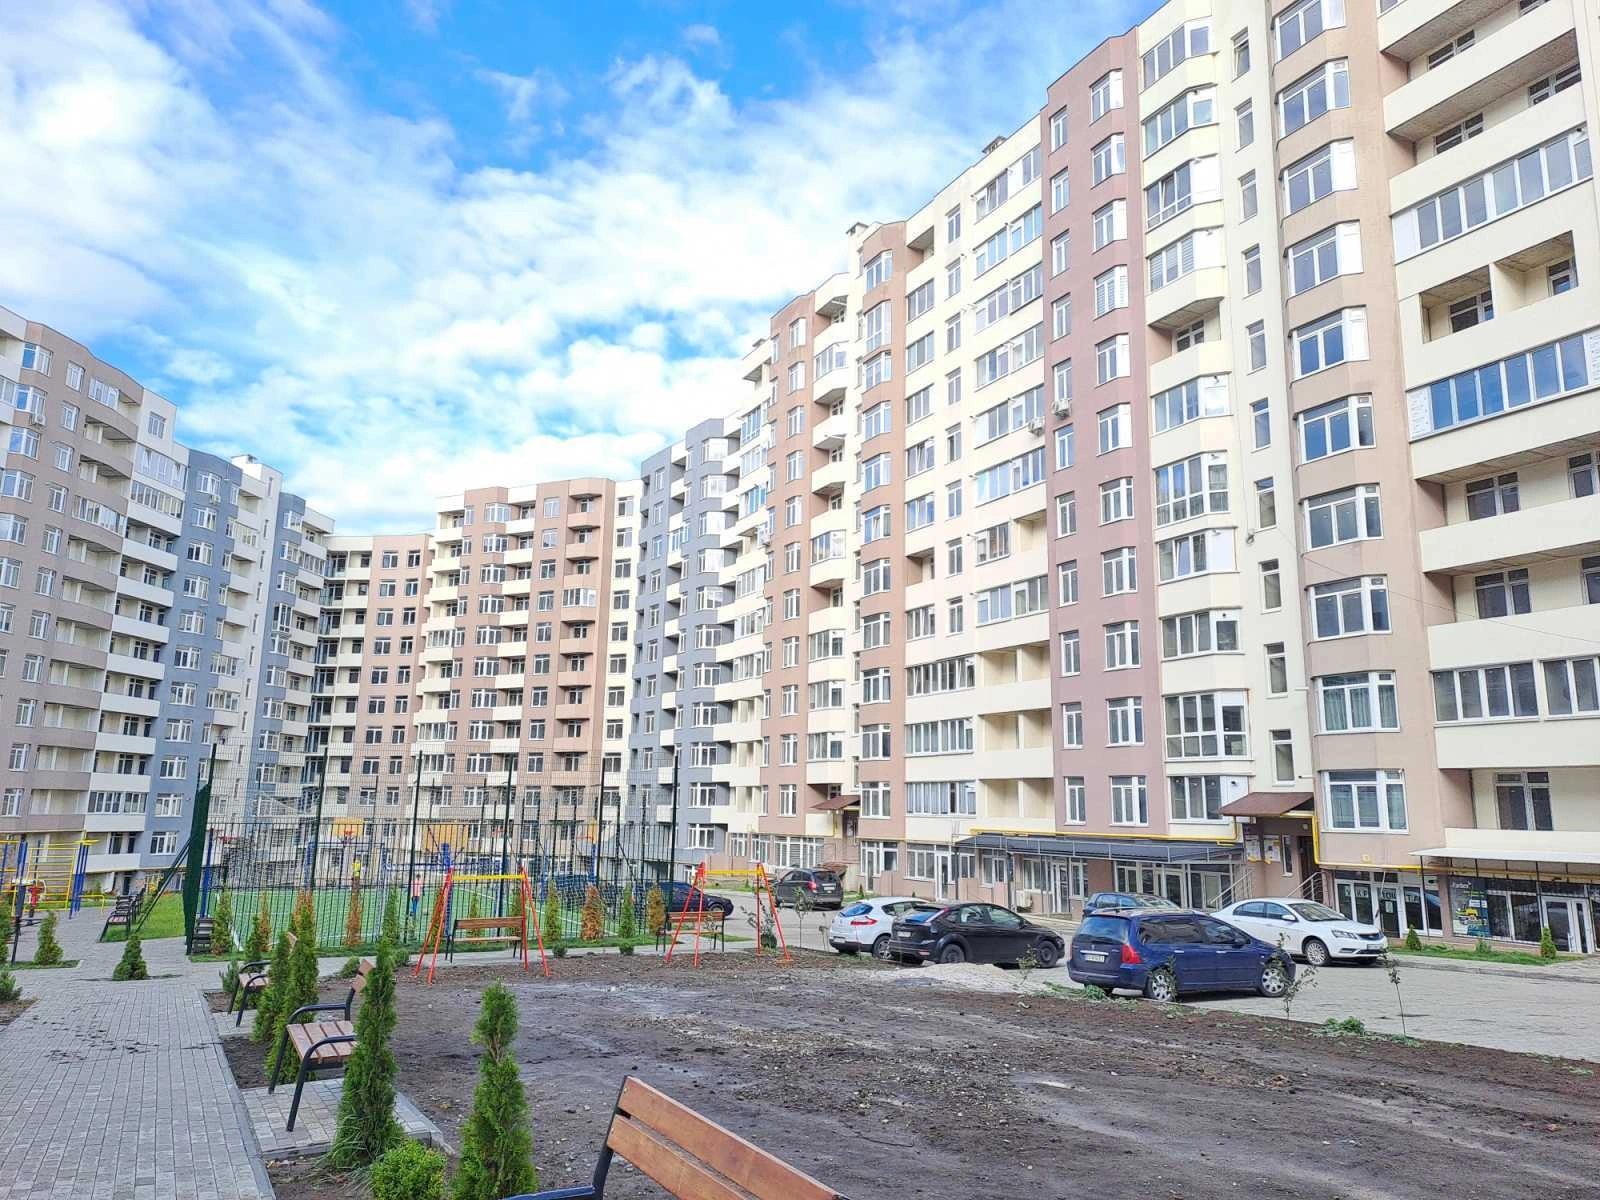 Apartments for sale. 2 rooms, 56 m², 2nd floor/11 floors. Bam, Ternopil. 